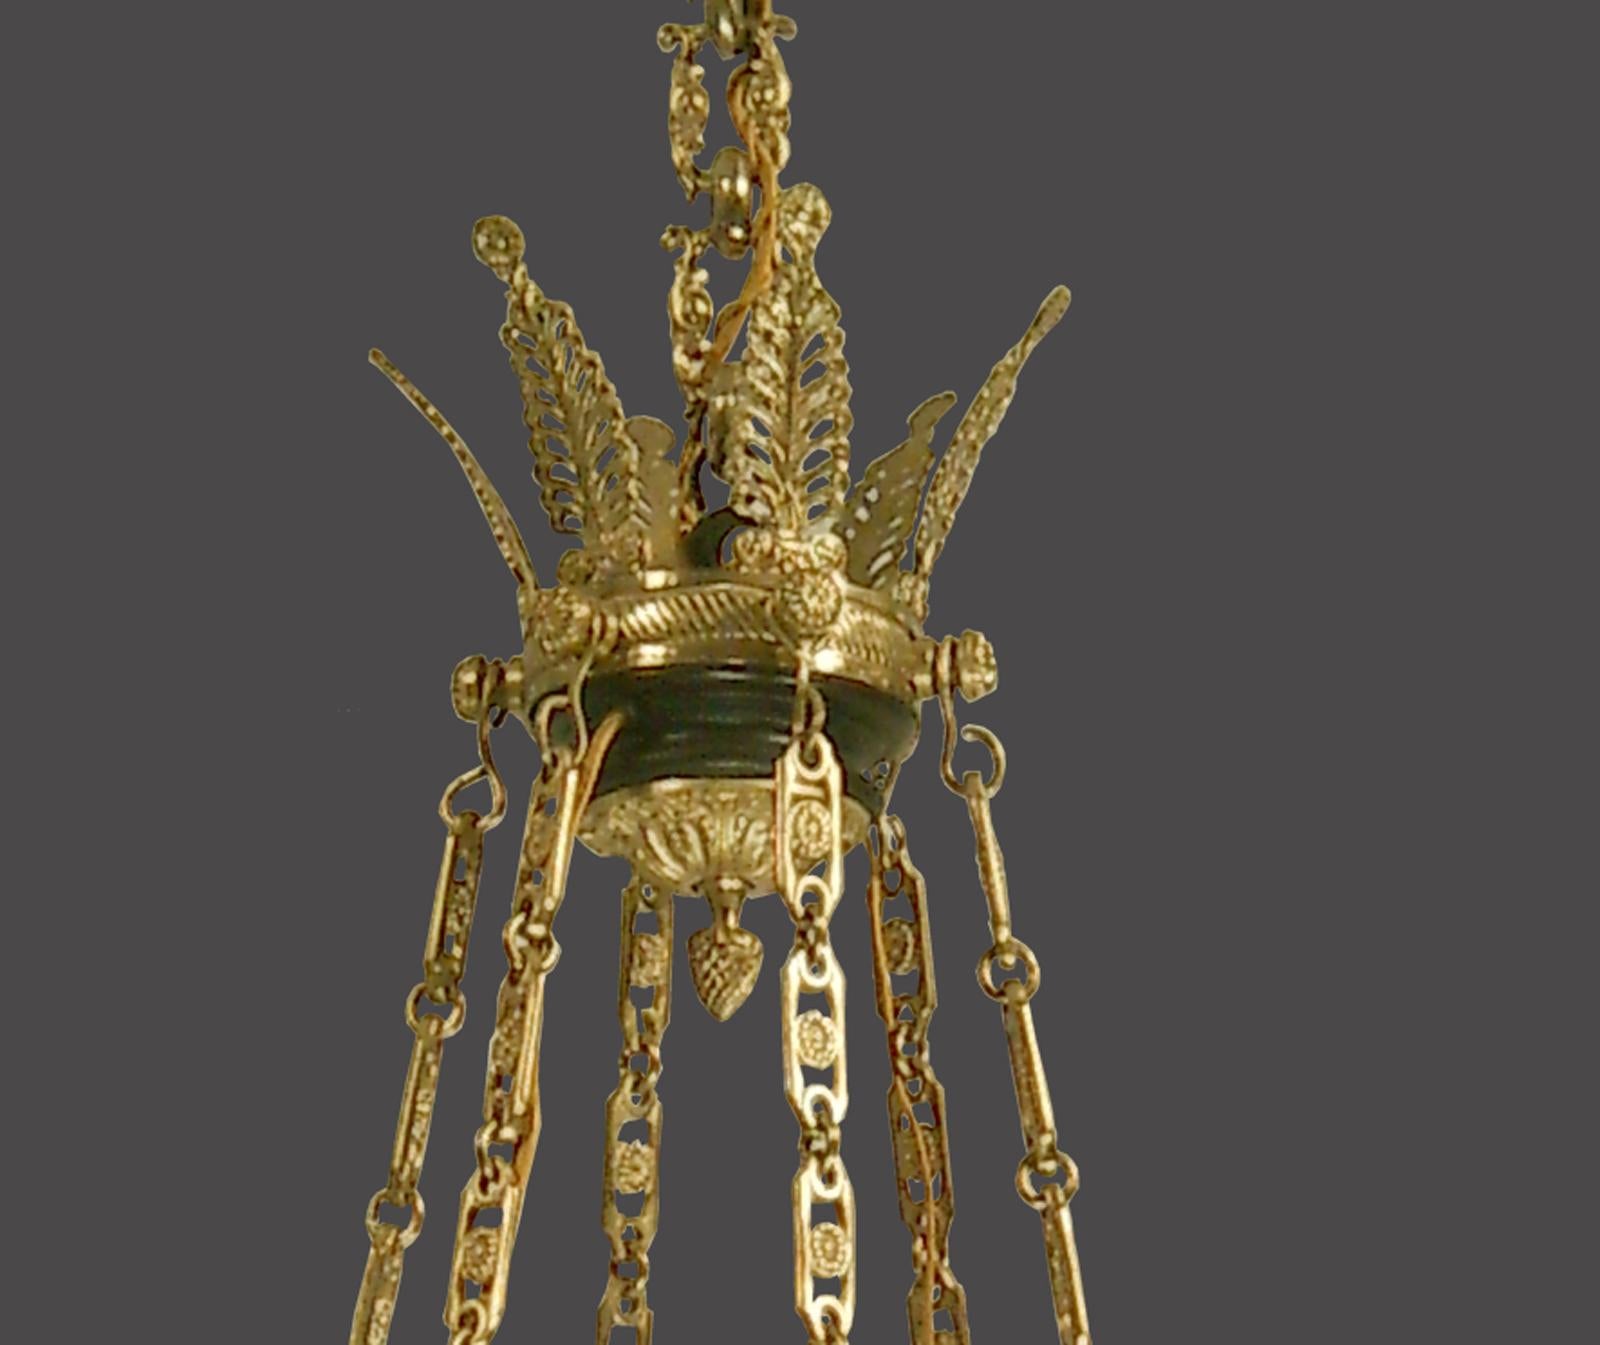 Original Historistic Empire Chandelier 20th Century 1920, Six Flames, Restored In Good Condition For Sale In Vienna, AT